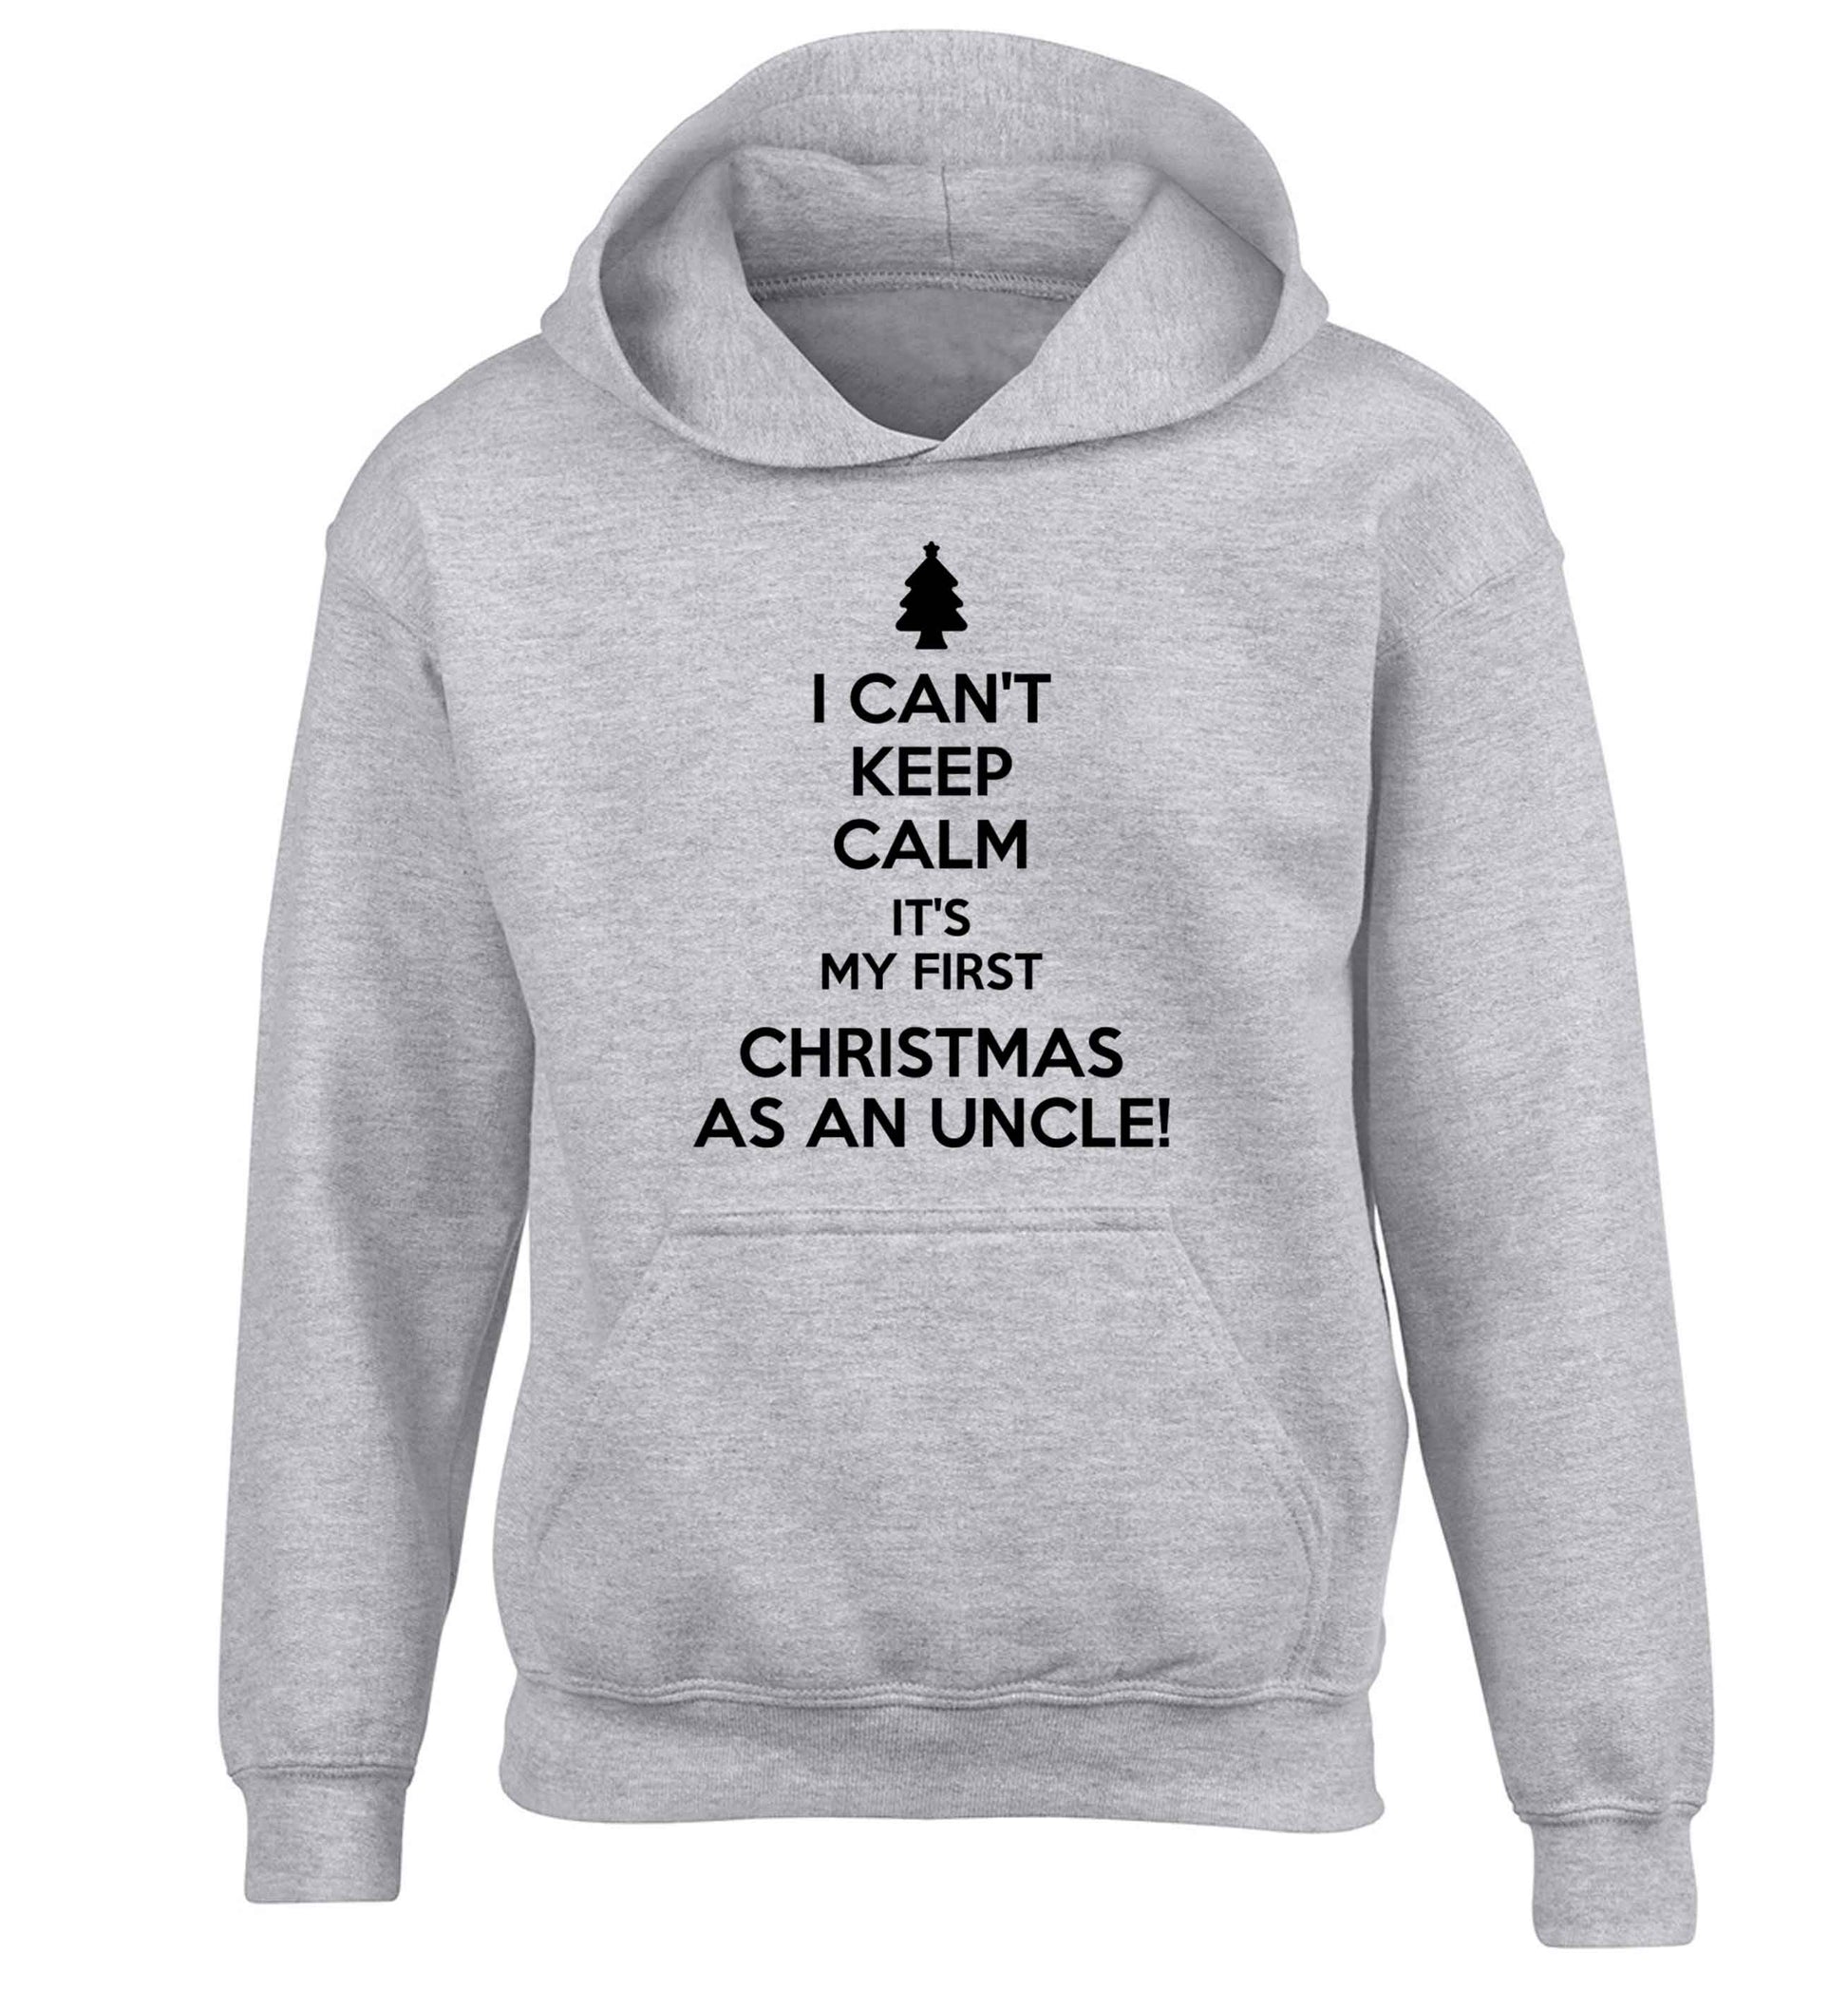 I can't keep calm it's my first Christmas as an uncle! children's grey hoodie 12-13 Years